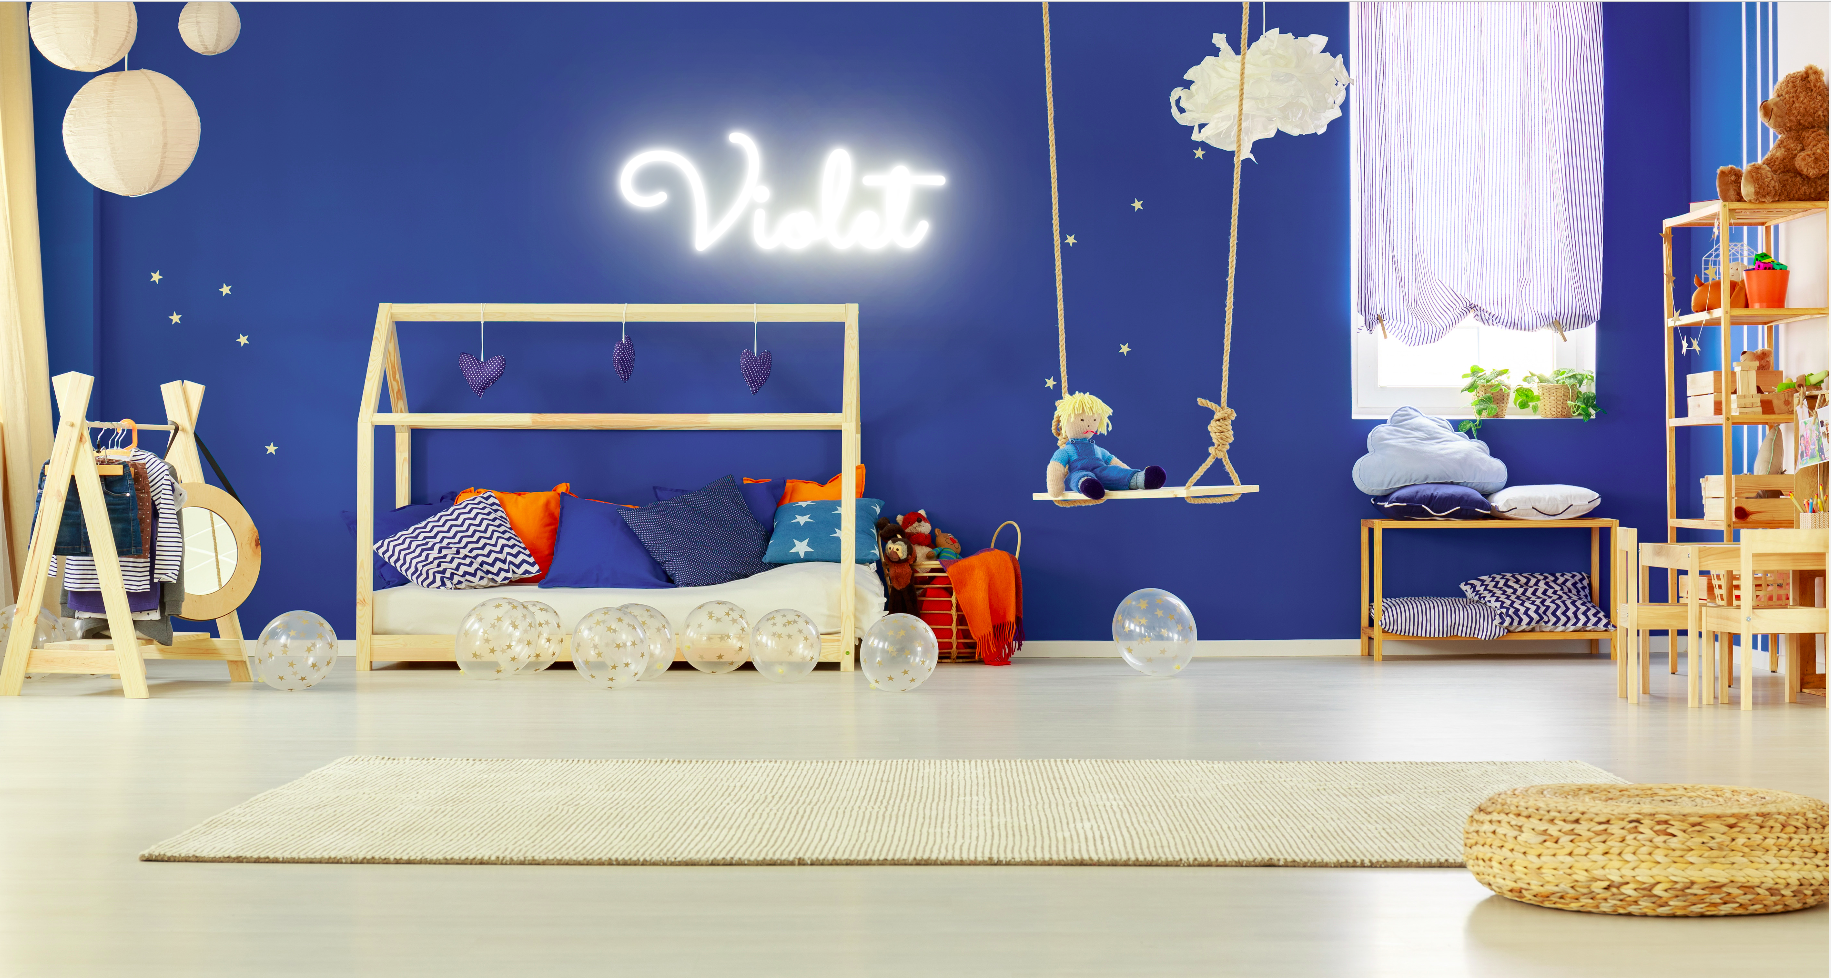 "Violet" Baby Name LED Neon Sign